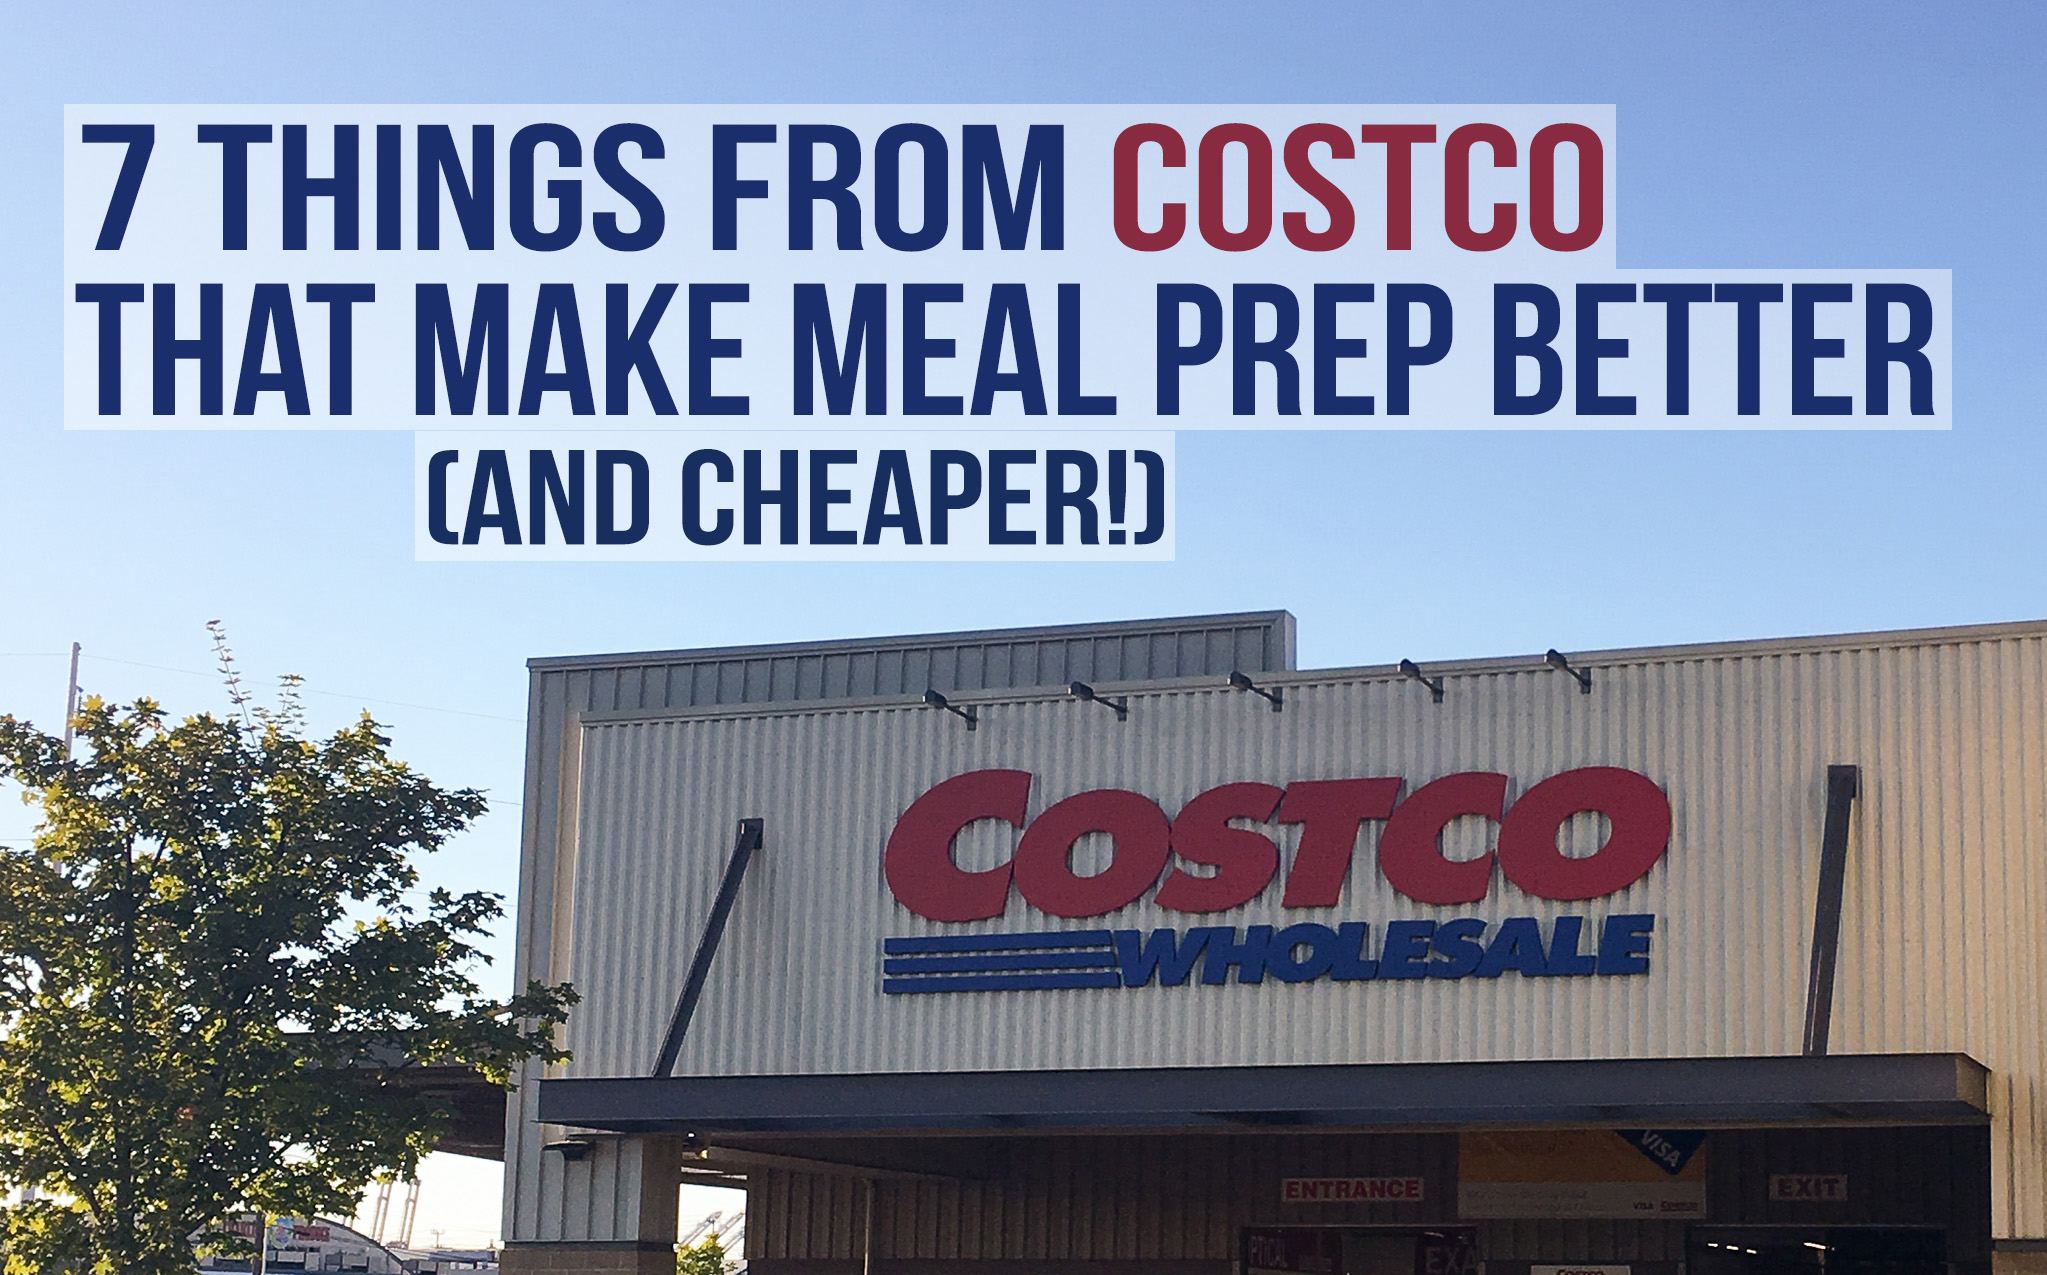 7 Things from Costco That Make Meal Prep Better (and Cheaper!) - Help make your meal prep more affordable!